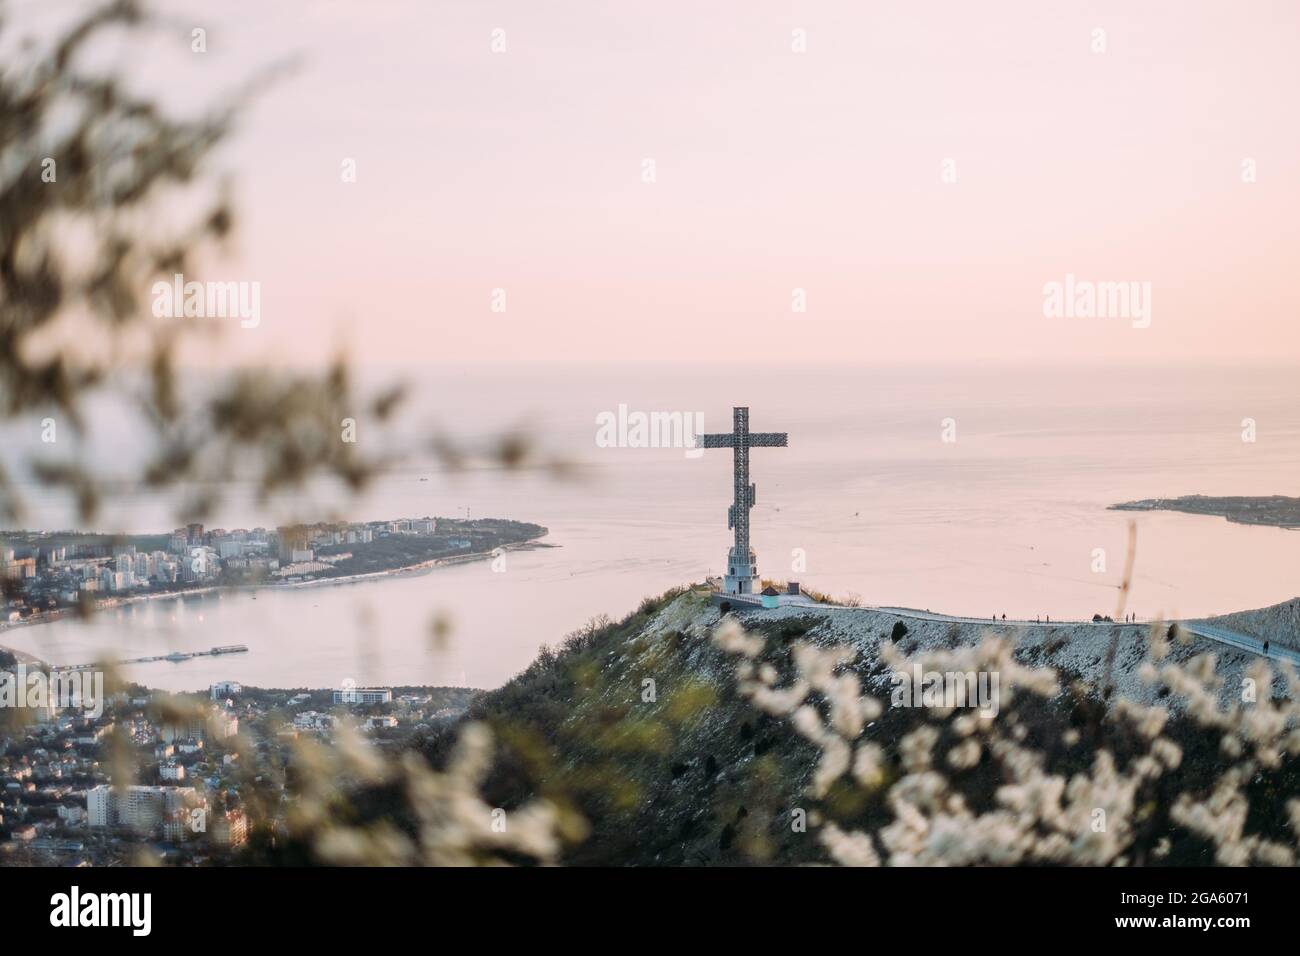 Orthodox cross on Markotkh ridge. A flowering tree in the foreground. Stock Photo